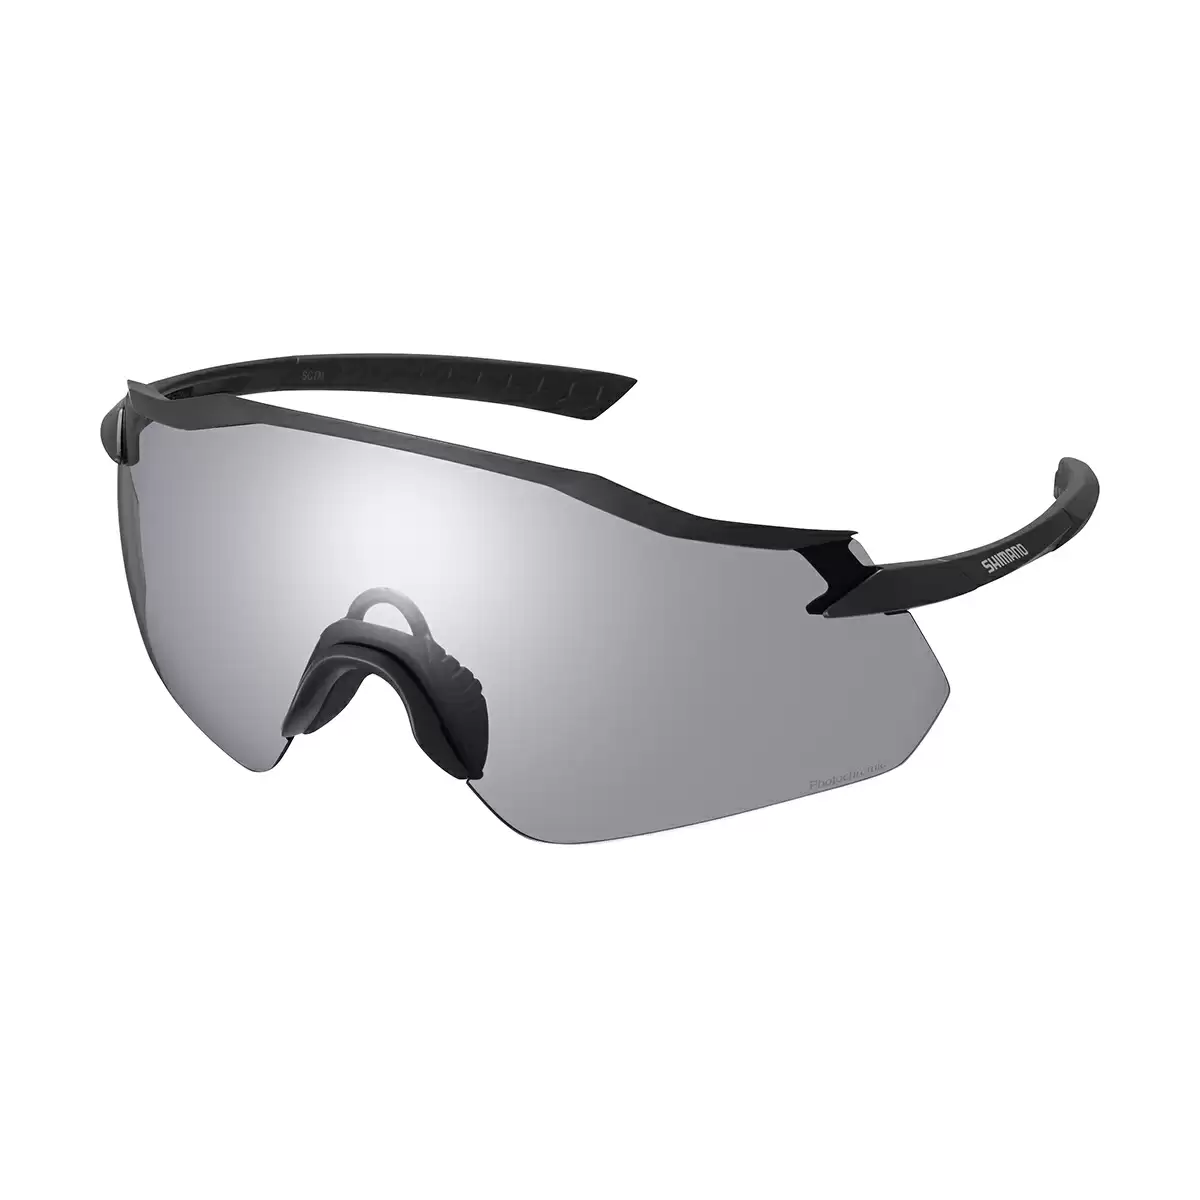 CE-EQNX4 Equinox Glasses Gray with Black Photochromic Lens - image